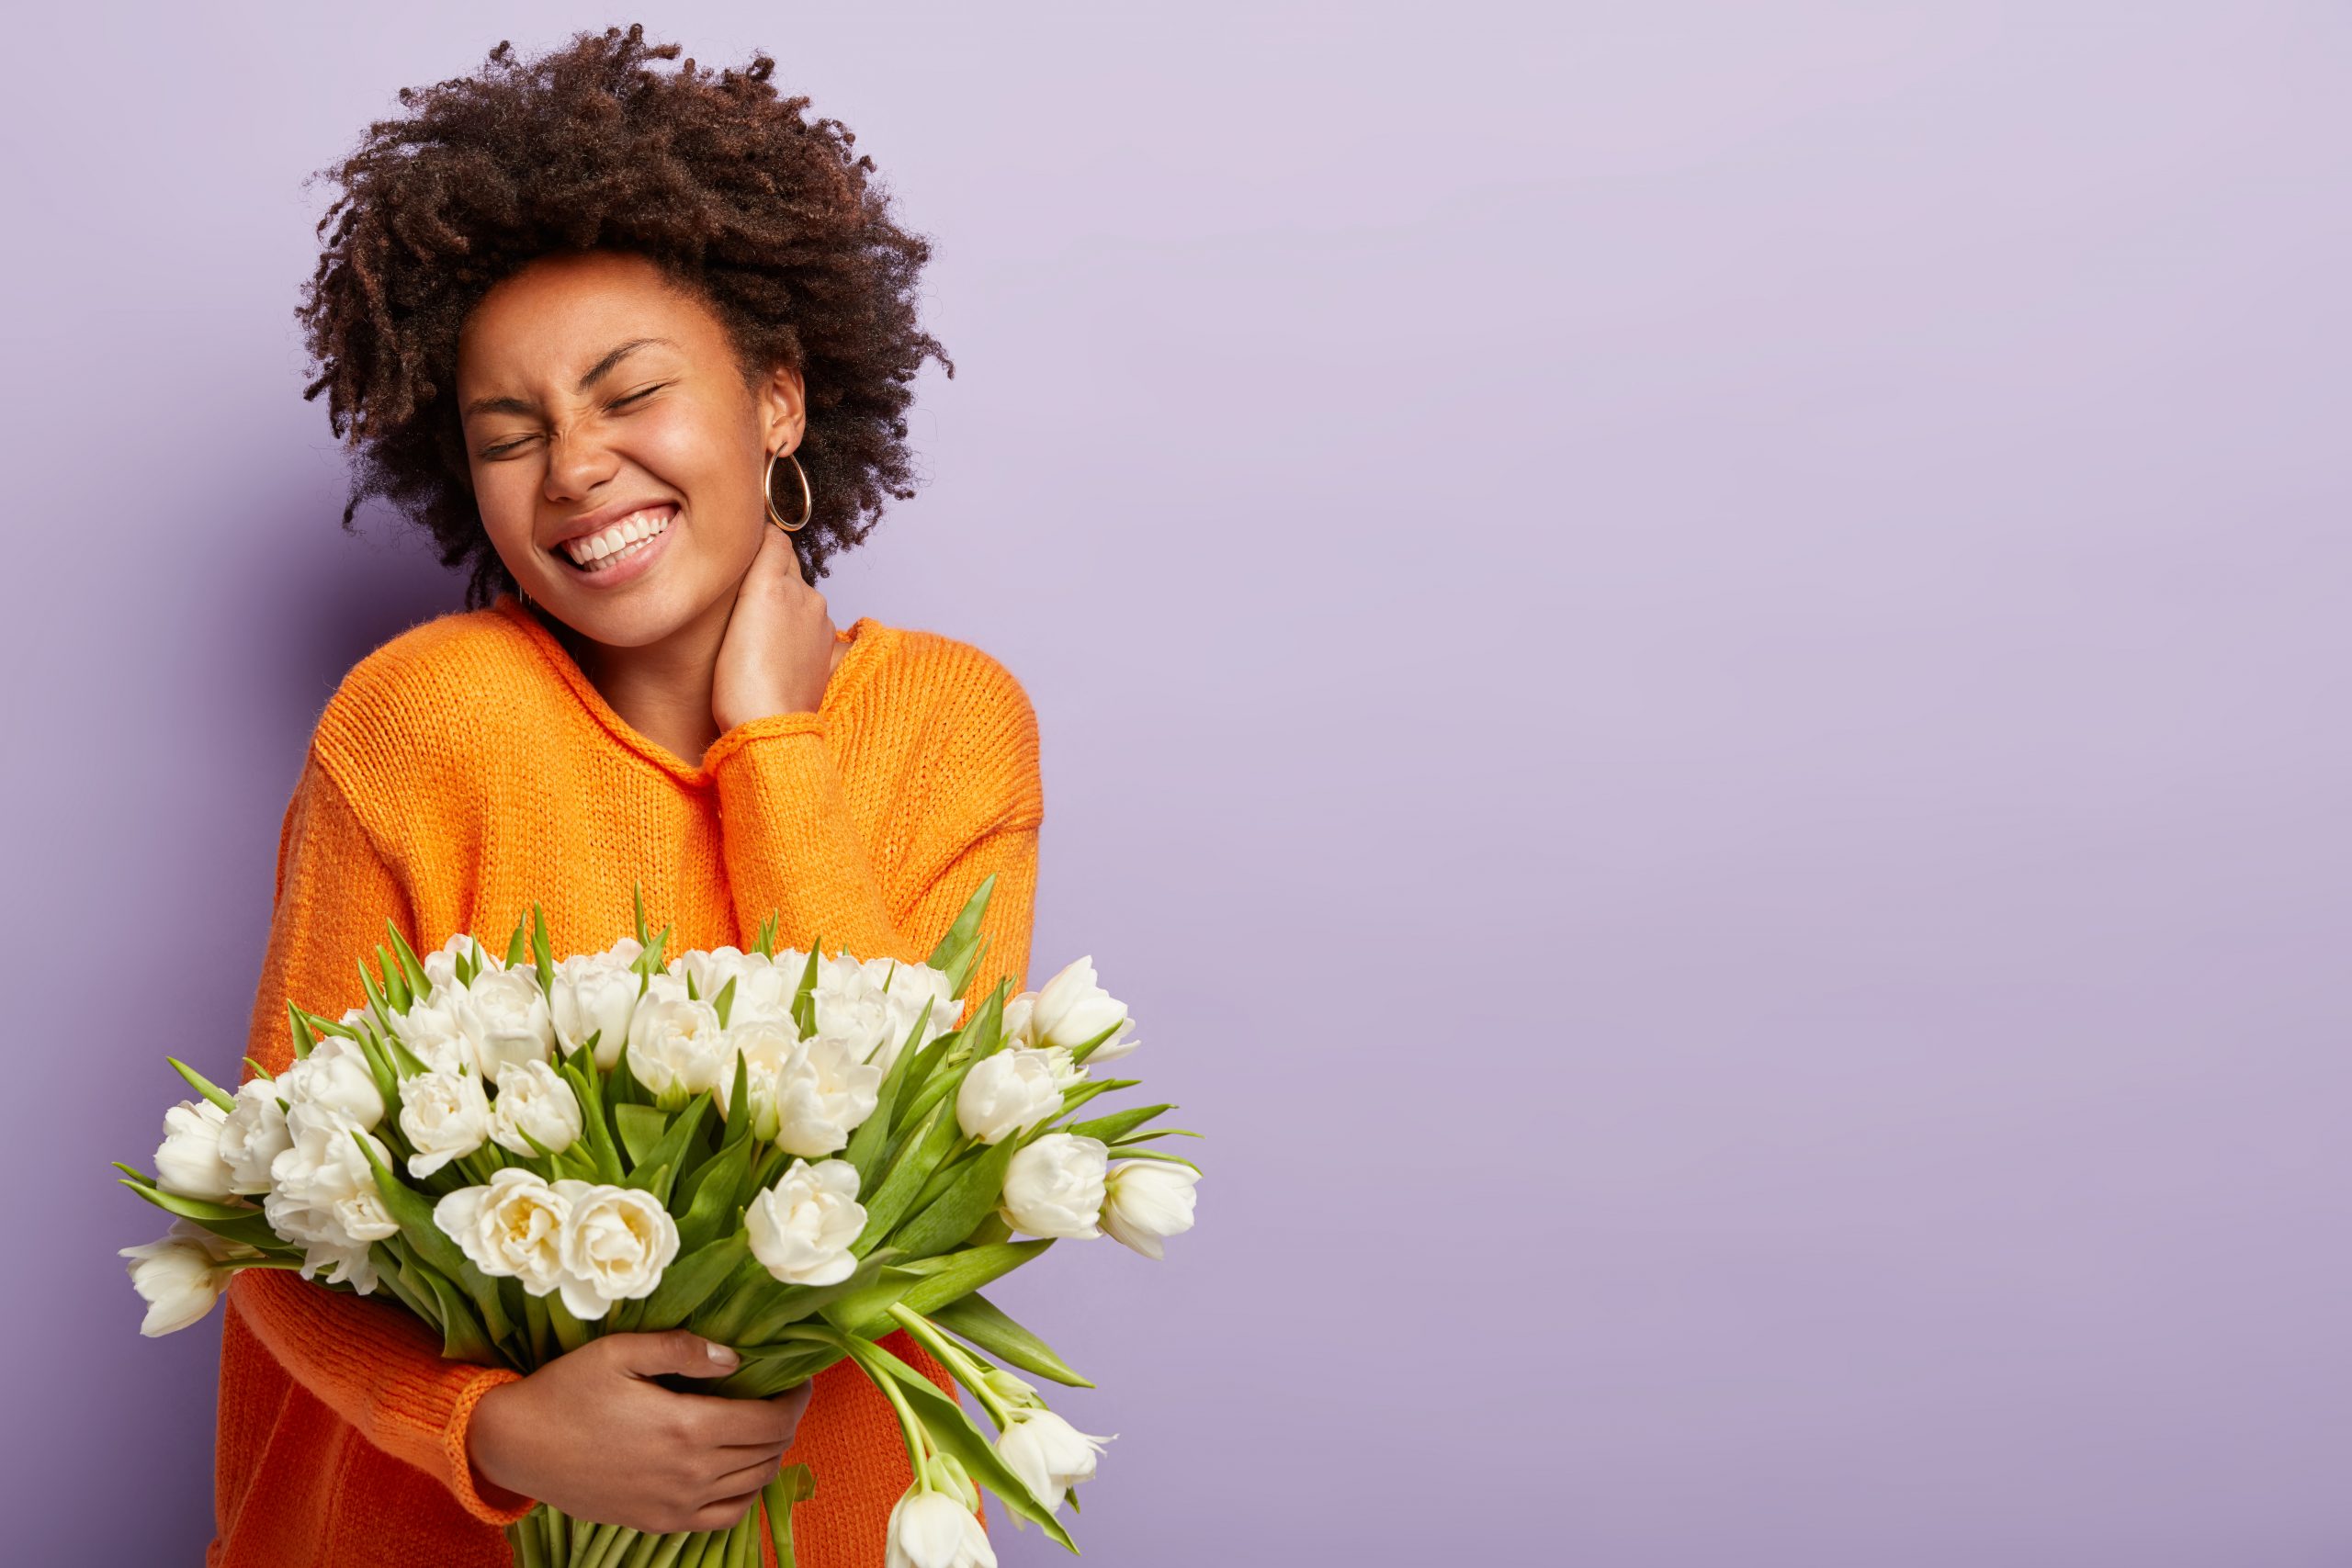 jubilant-upbeat-black-woman-has-curly-hair-broad-shining-smile-keeps-hand-on-neck-eyes-shut-wears-orange-sweater-holds-white-flowers-with-pleasant-scent-models-over-purple-studio-wall-spring